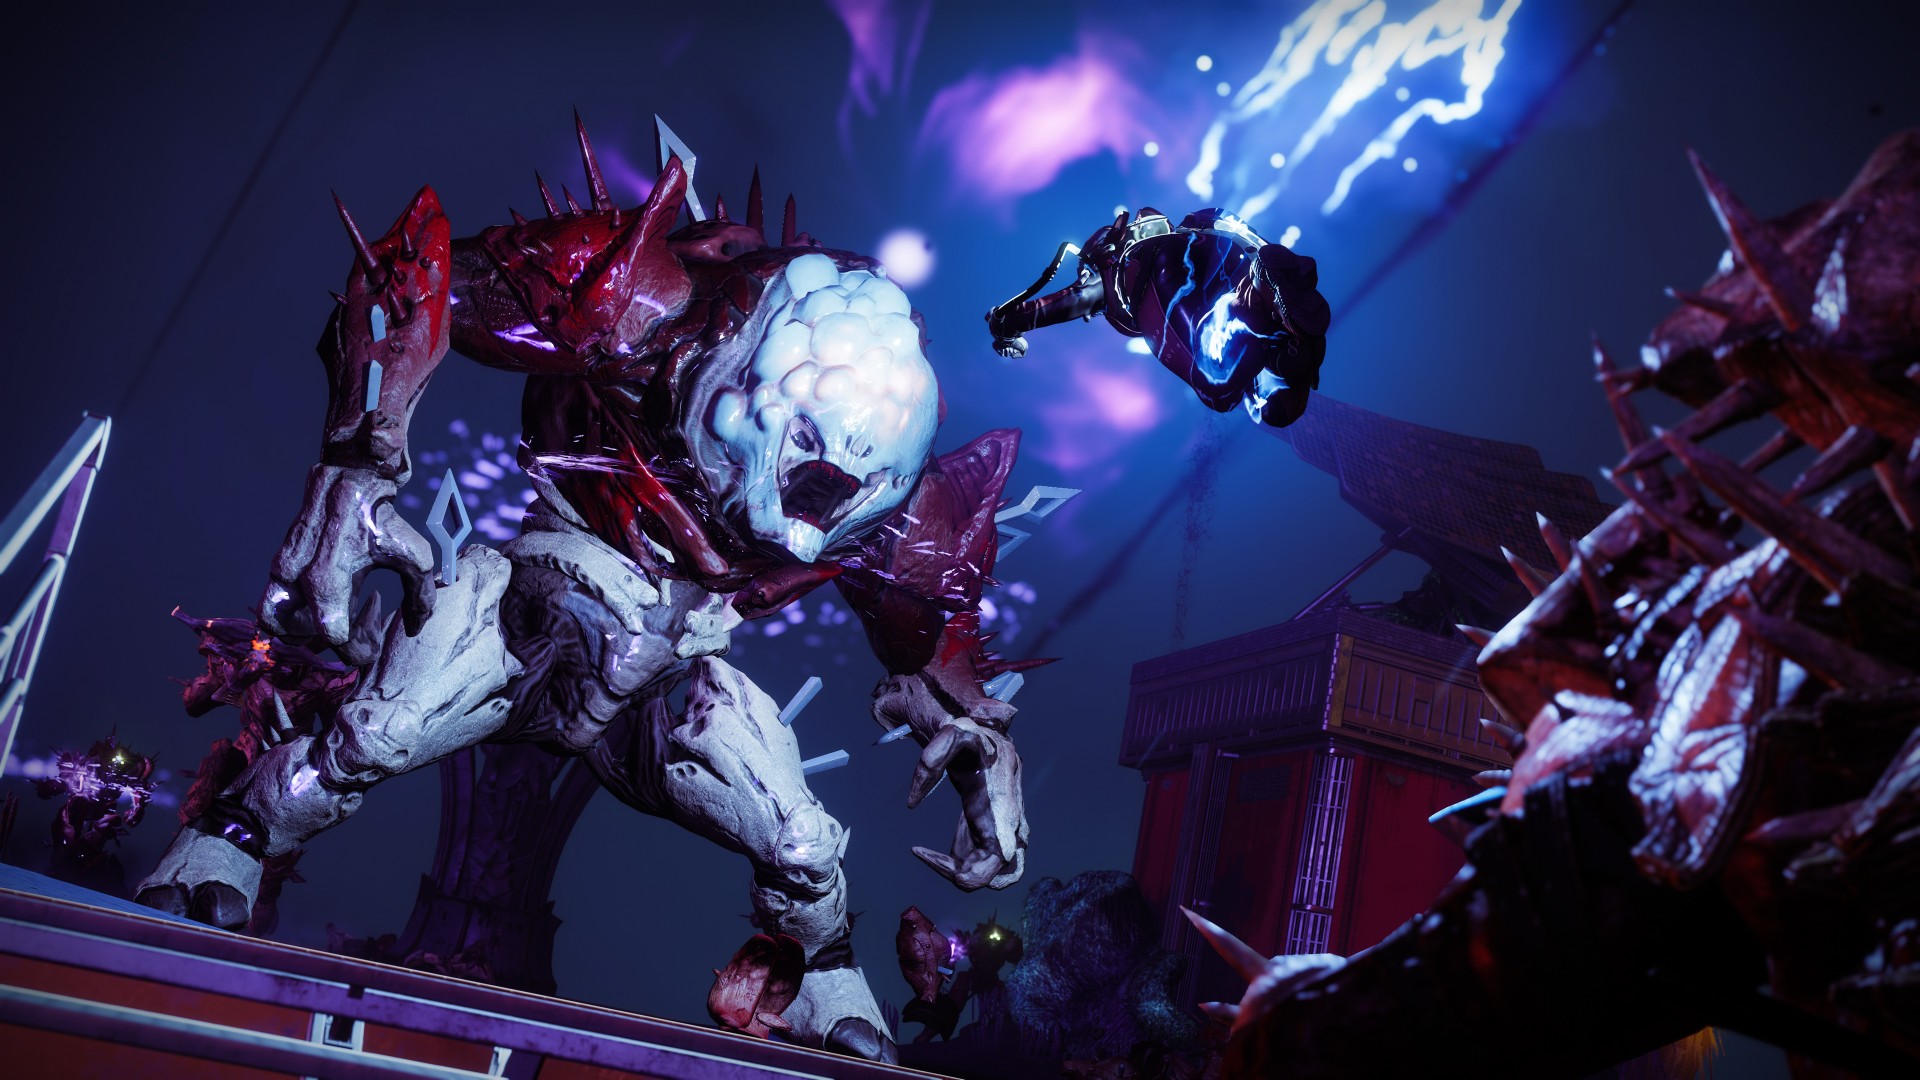 Destiny 2 State of the Game: A monster roars in Bungie FPS game Destiny 2